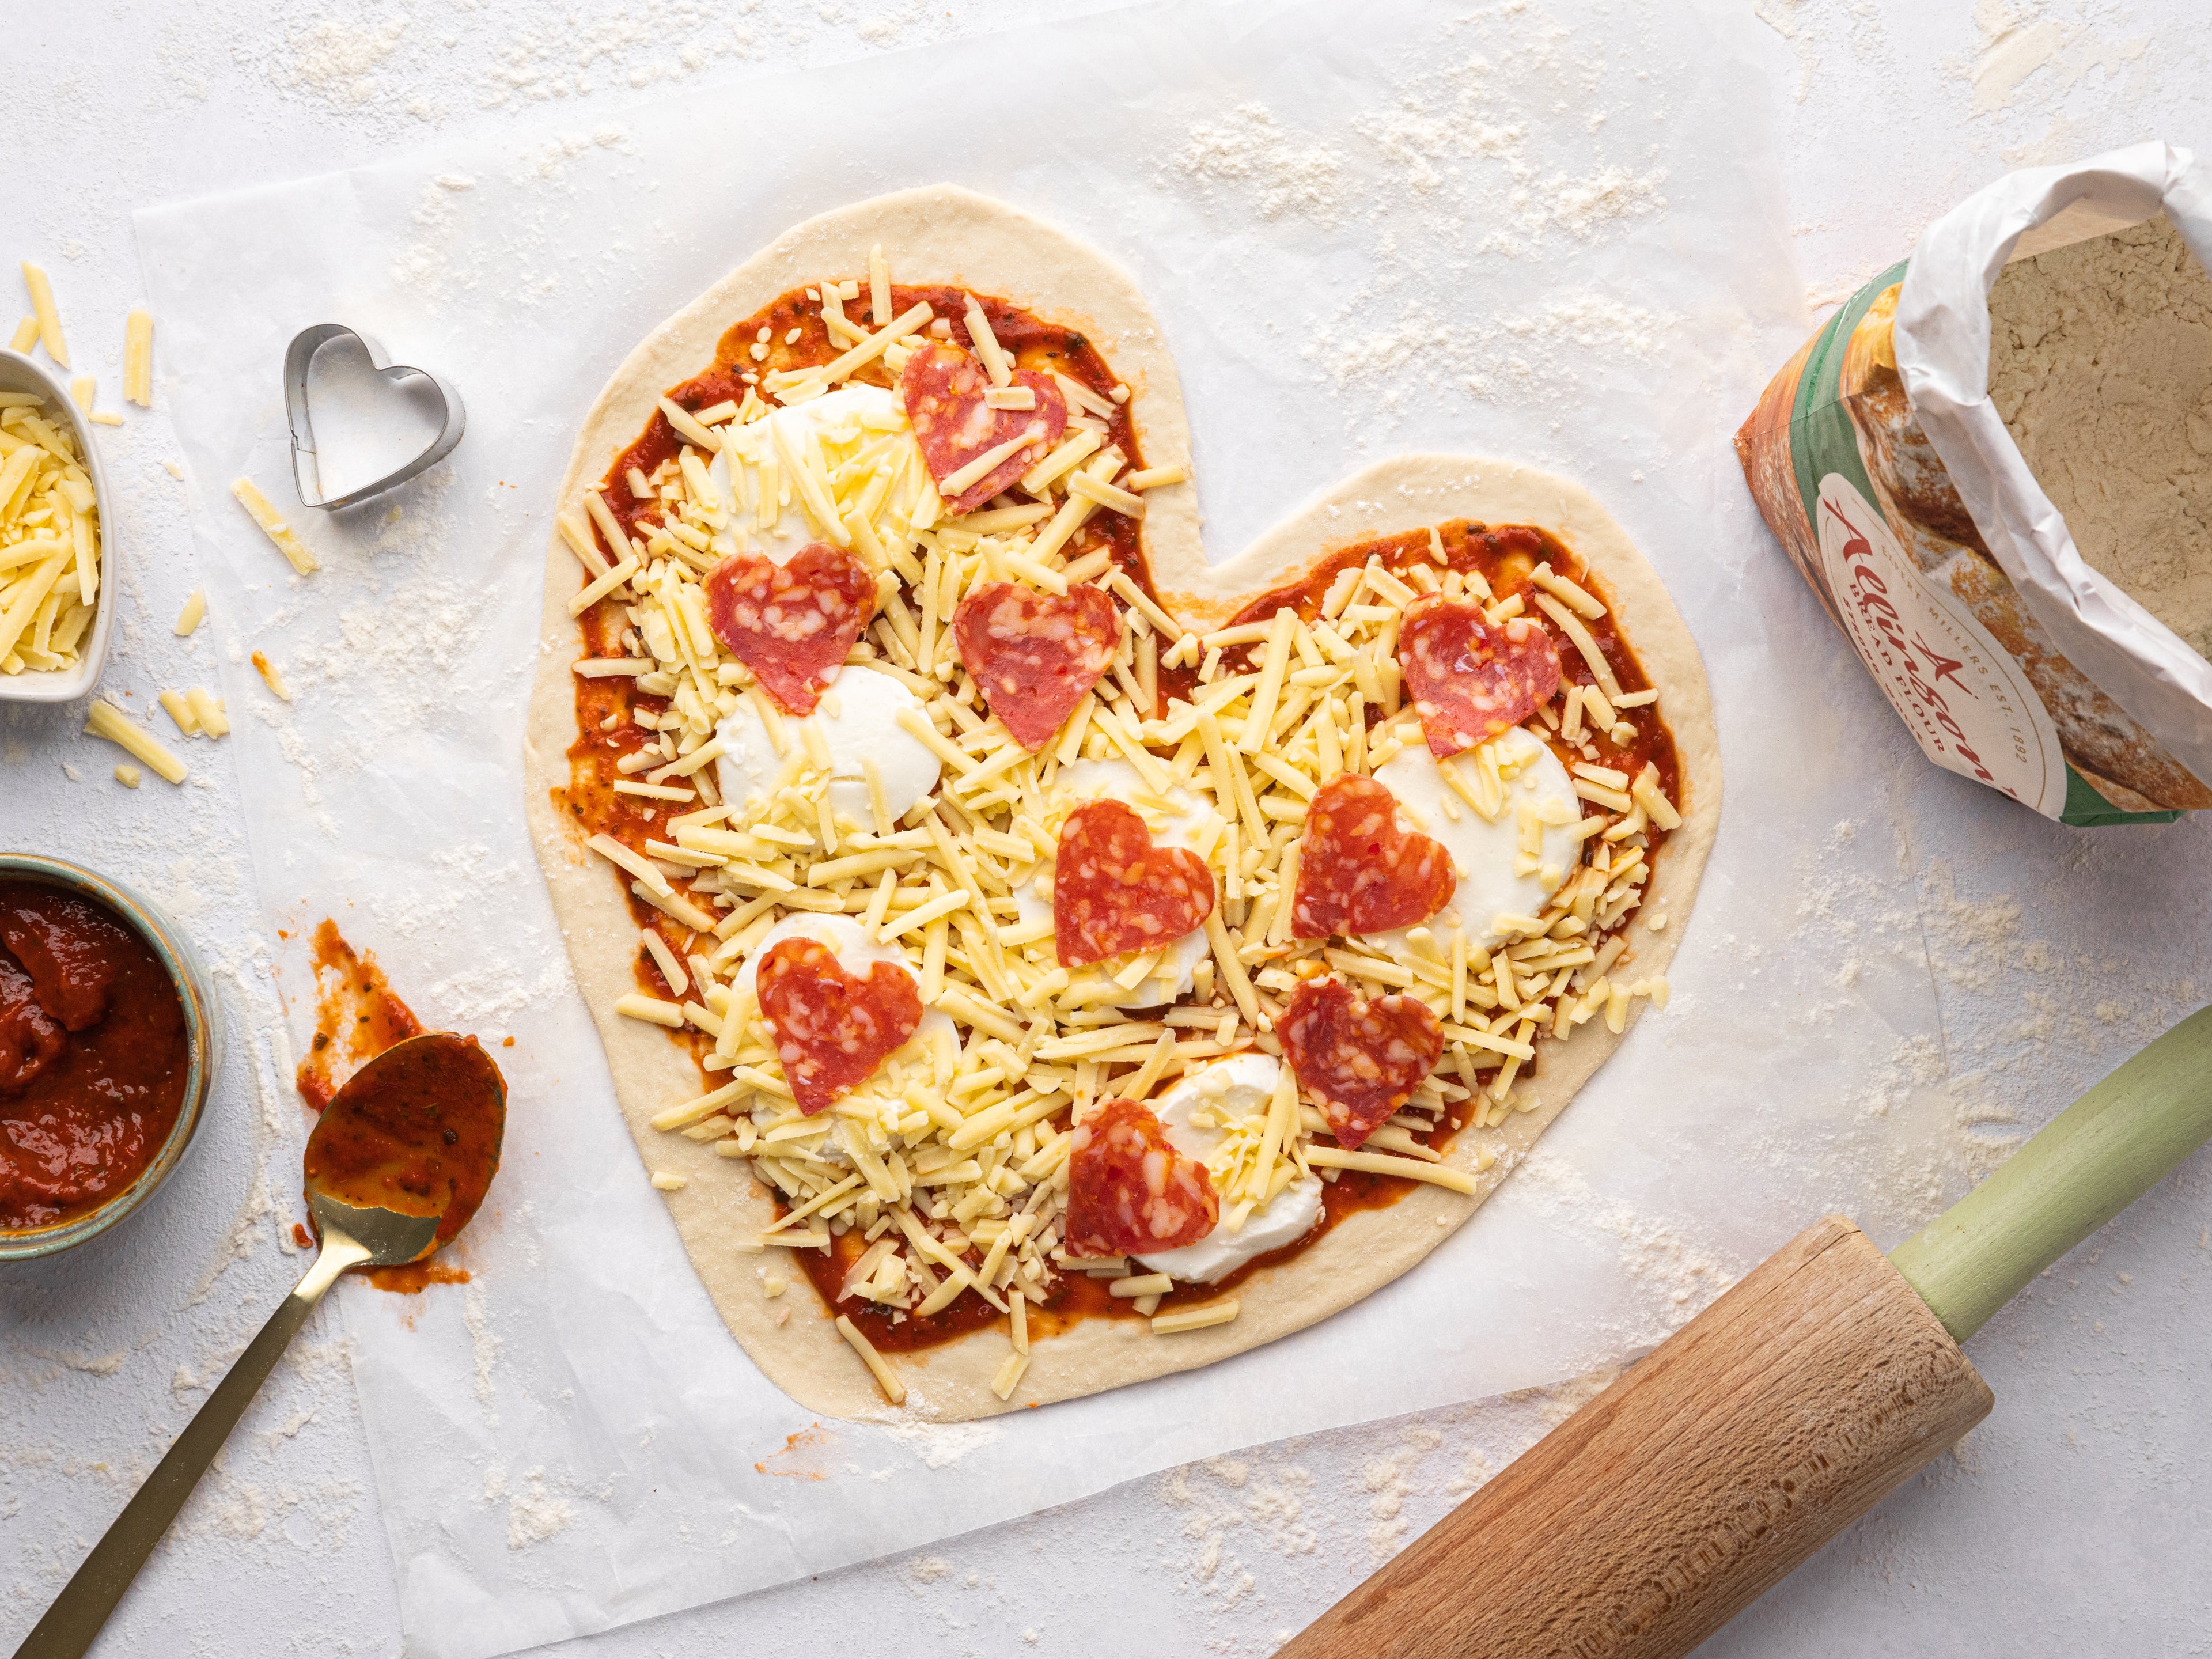 Heart shaped pizza topped with heart shaped pepperoni beside a bag of flour and messy kitchen scene